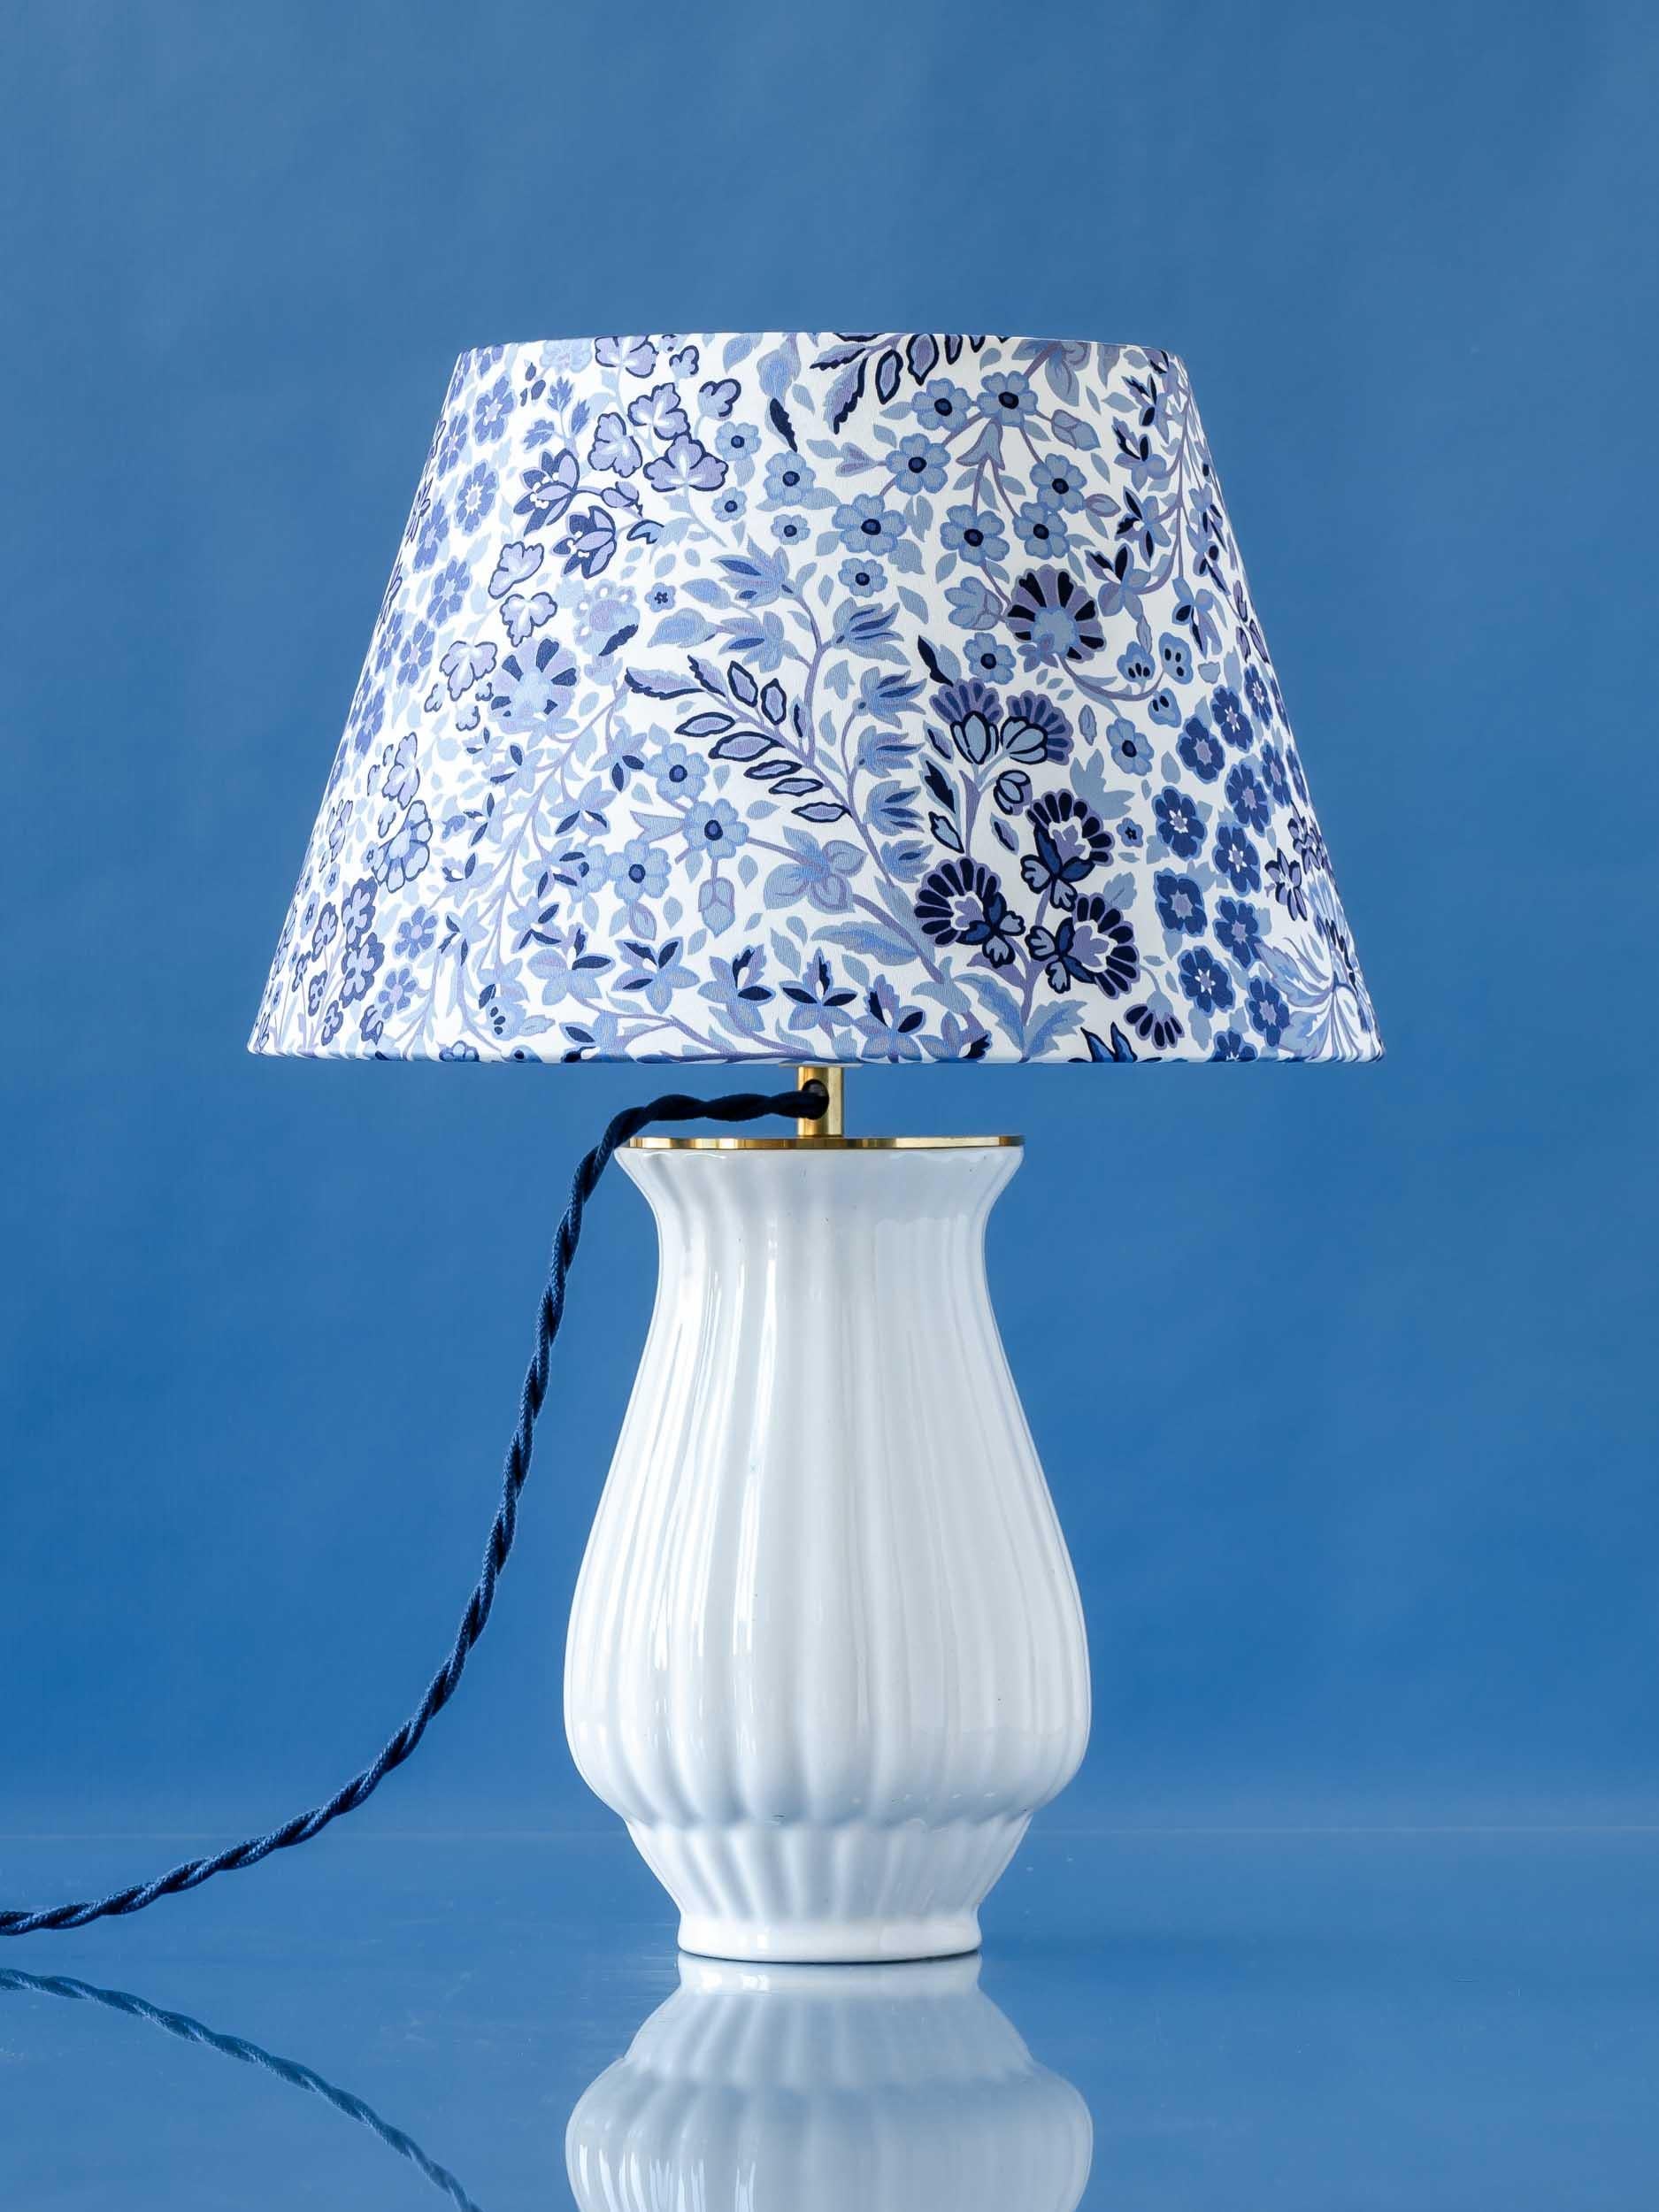 Hand-Crafted Royal Delft White Table Lamp + Liberty London Lampshade For Sale